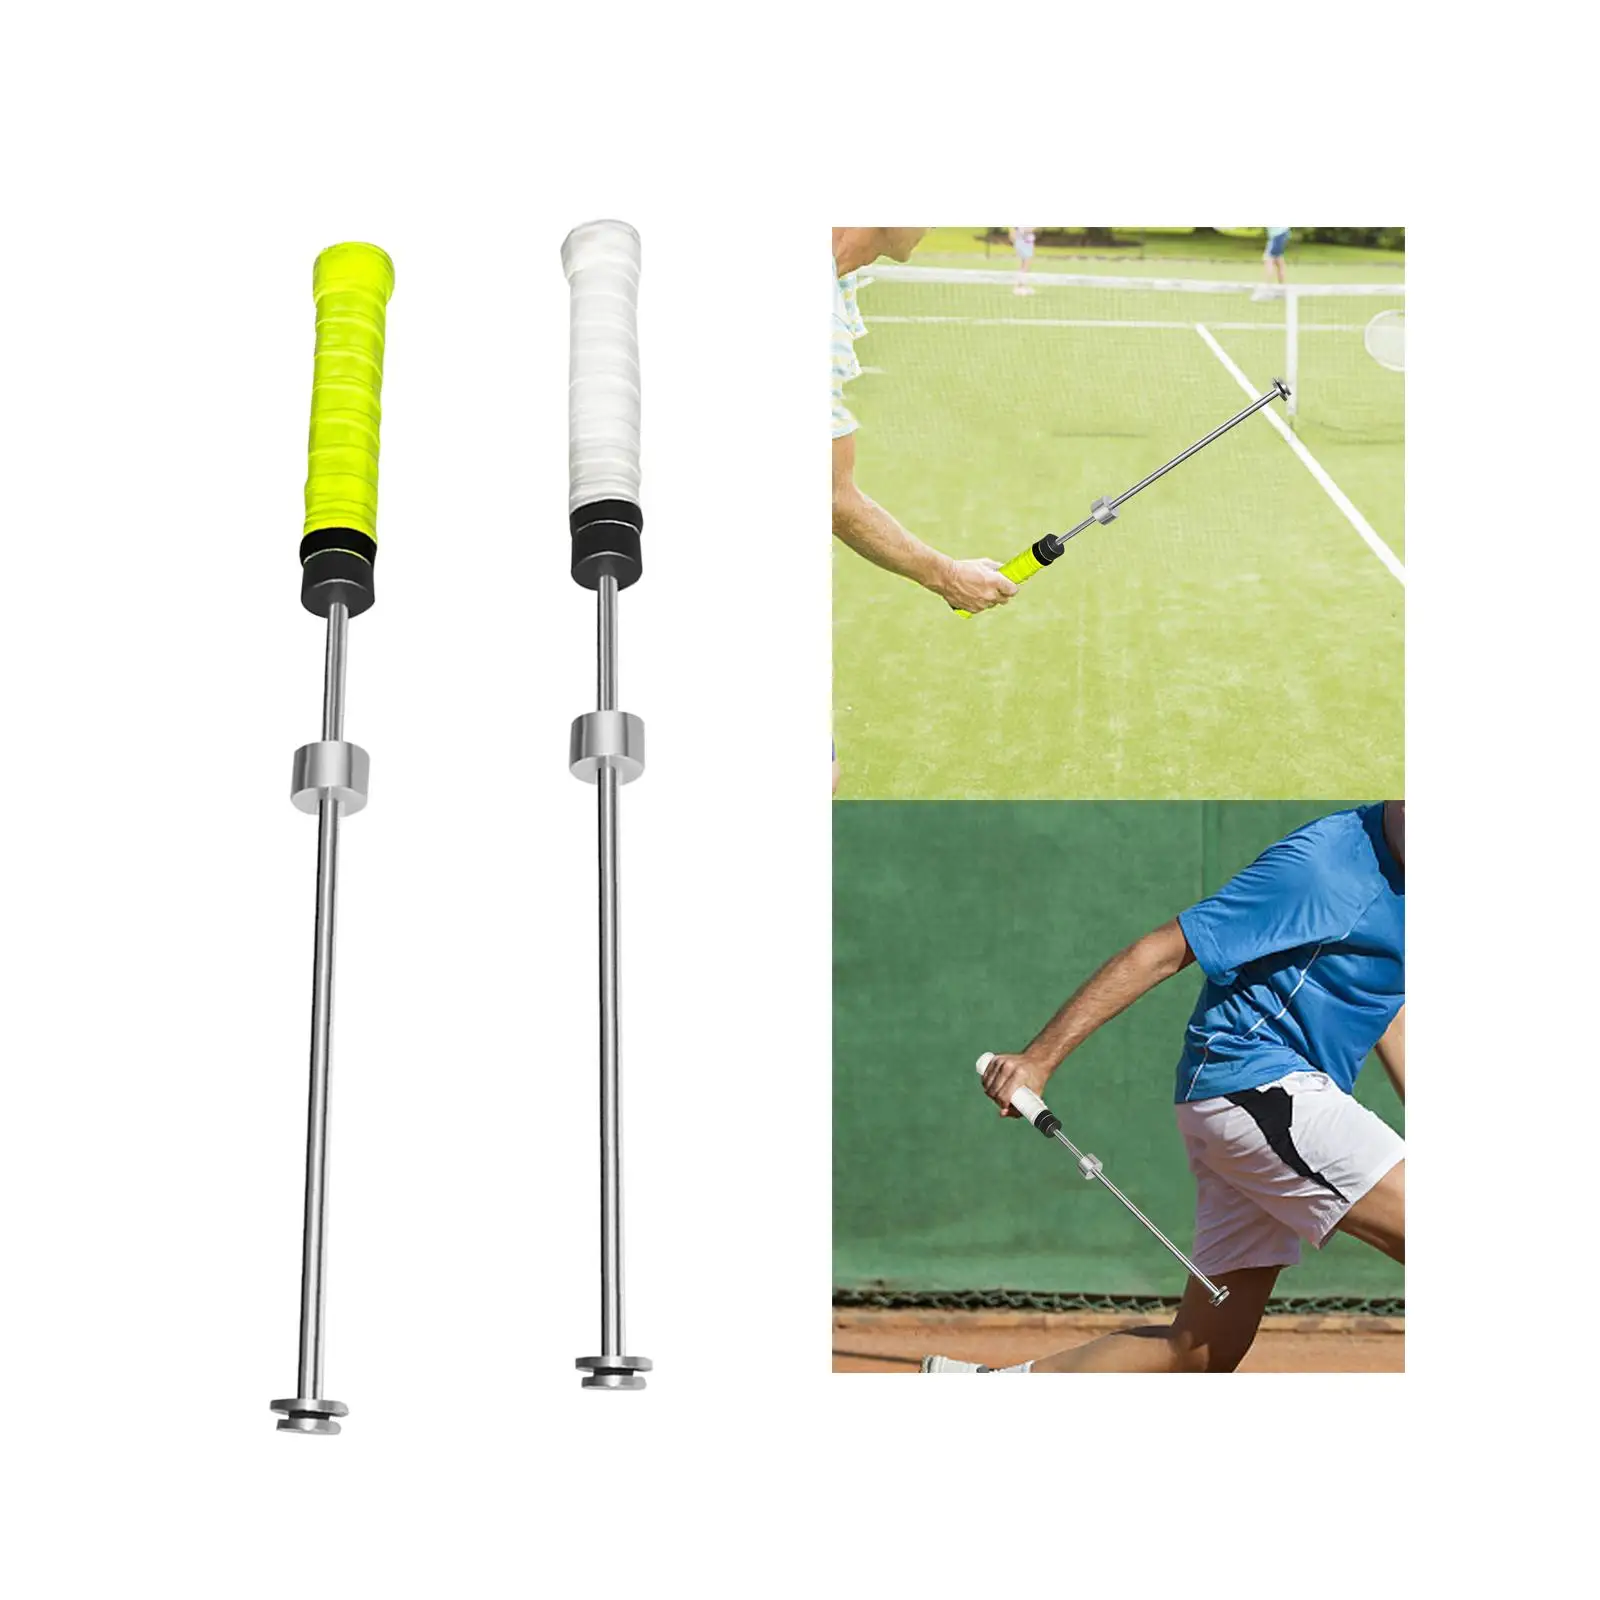 Tennis Swing Trainer Aid Sports Tool Comfortable Grip Sports Accessories Sound Remind